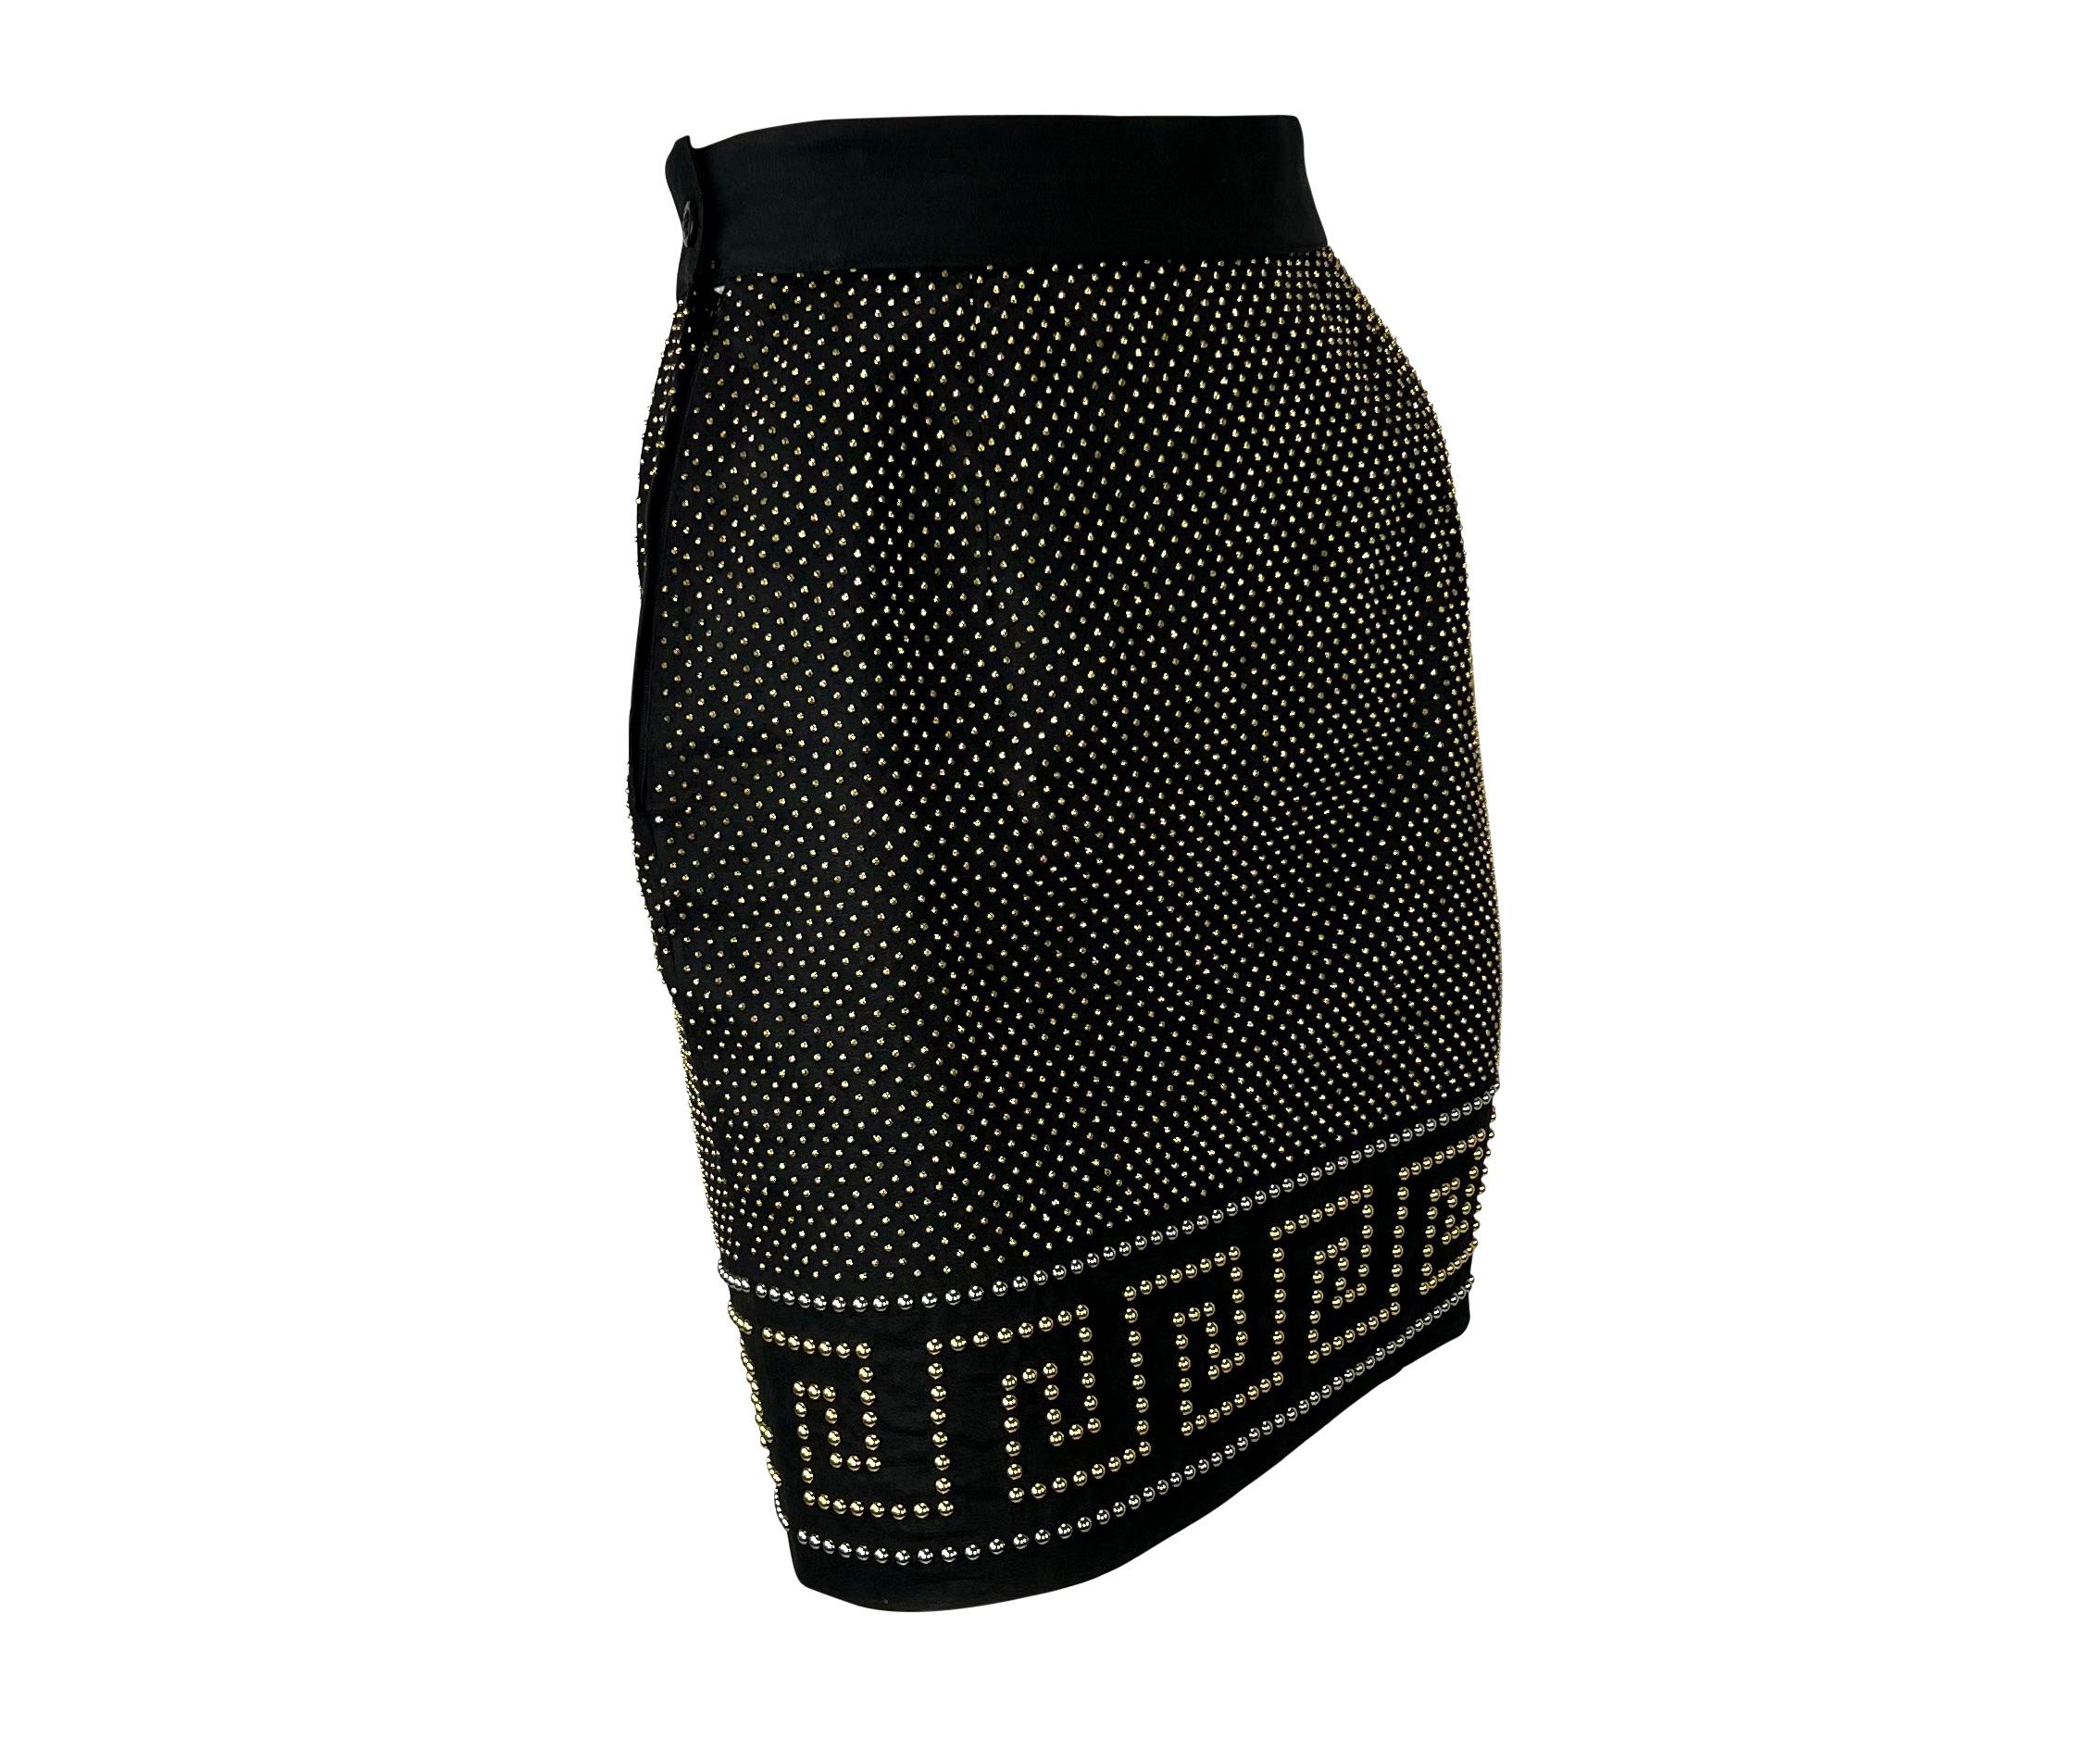 F/W 1992 Gianni Versace Couture 'Miss S&M' Studded Greek Key Skirt For Sale 6